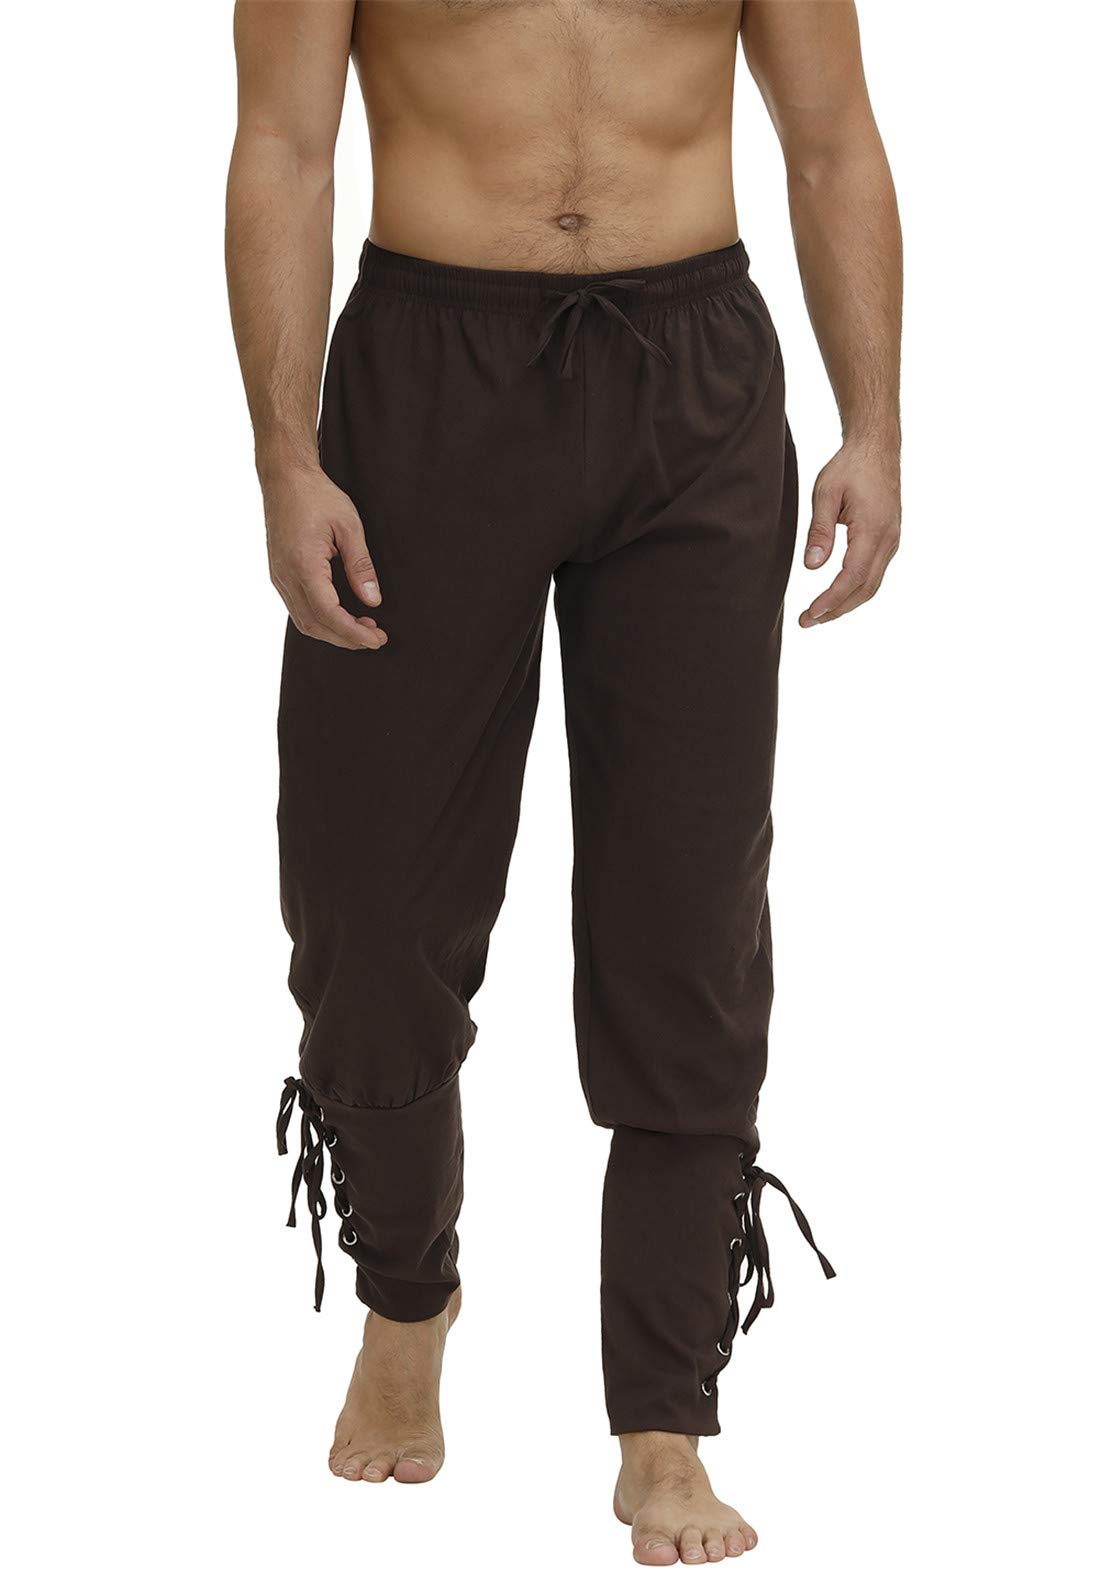 Men's Ankle Banded Cuff Renaissance Pants Medieval Viking Navigator Trousers Pirate Cosplay Costume with Drawstrings Small Brown